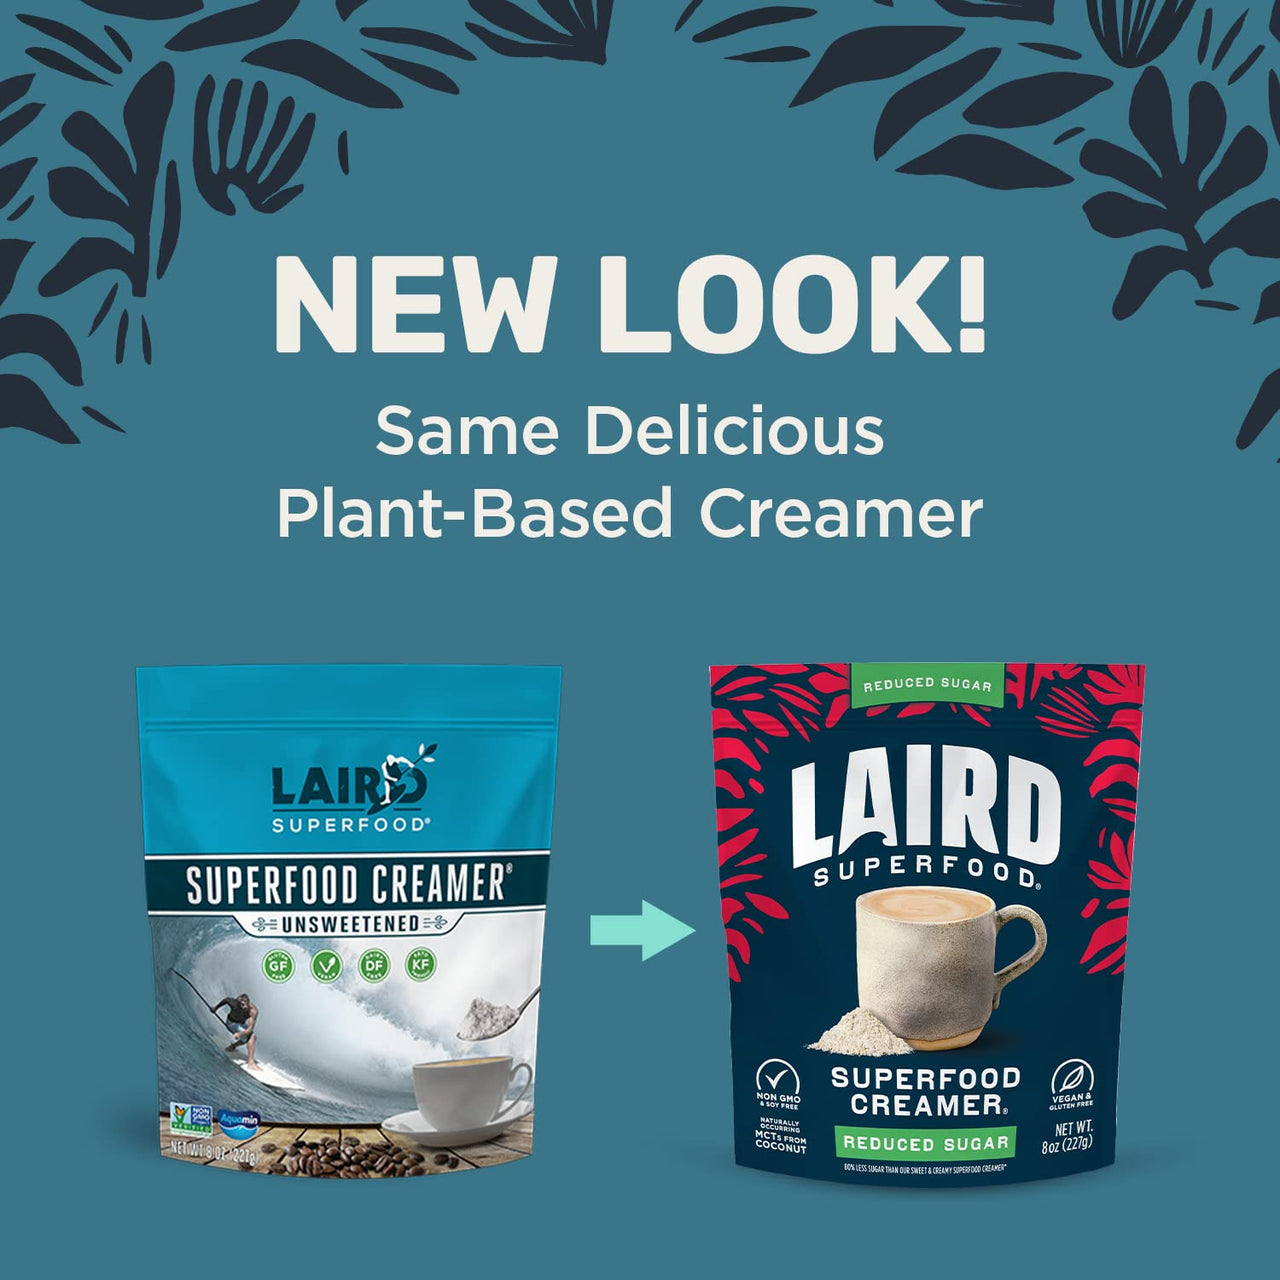 Laird Superfood Creamer® - Reduced Sugar - 8oz. new look